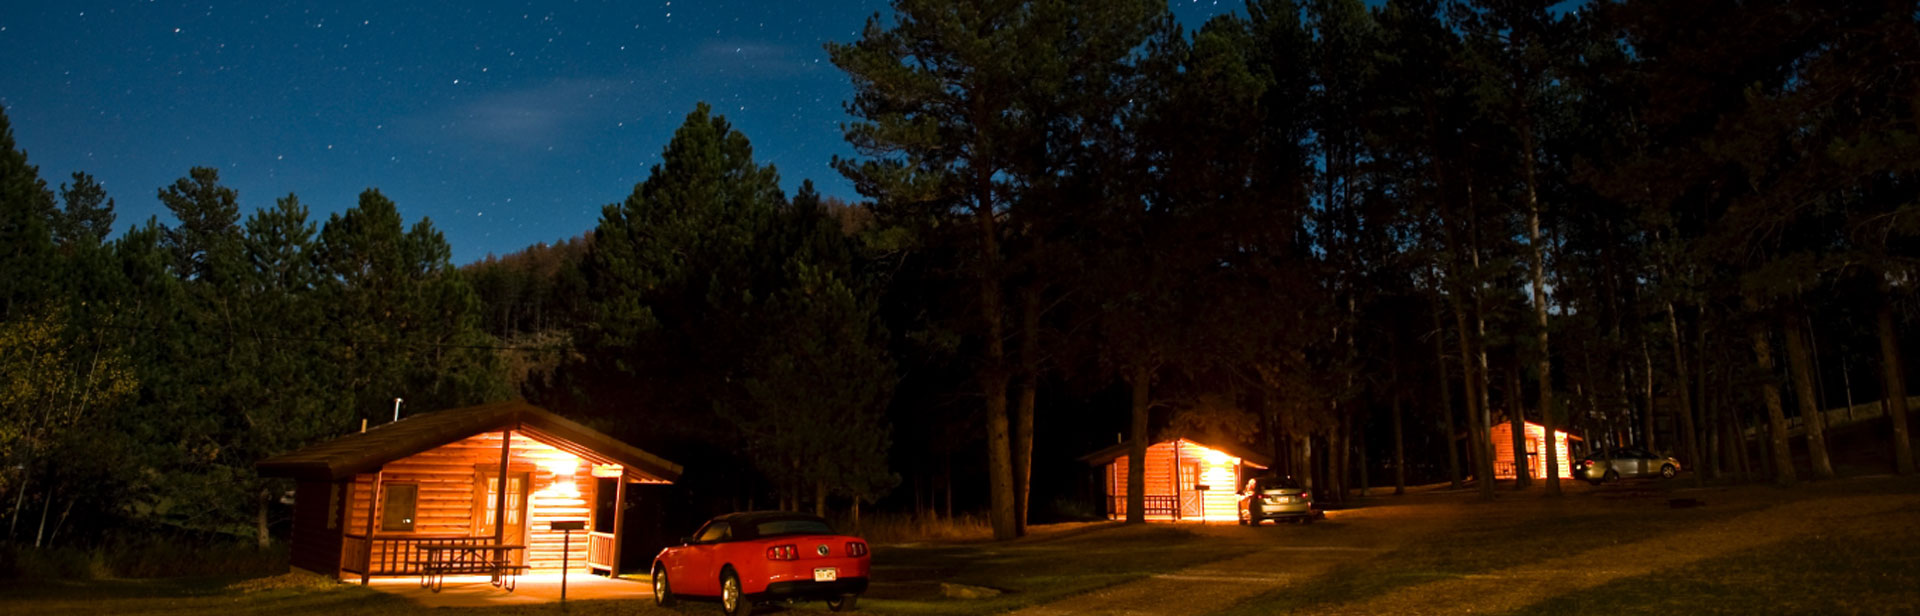 Enjoy Camping in our cozy Cabins in Black Hills South Dakota with ...